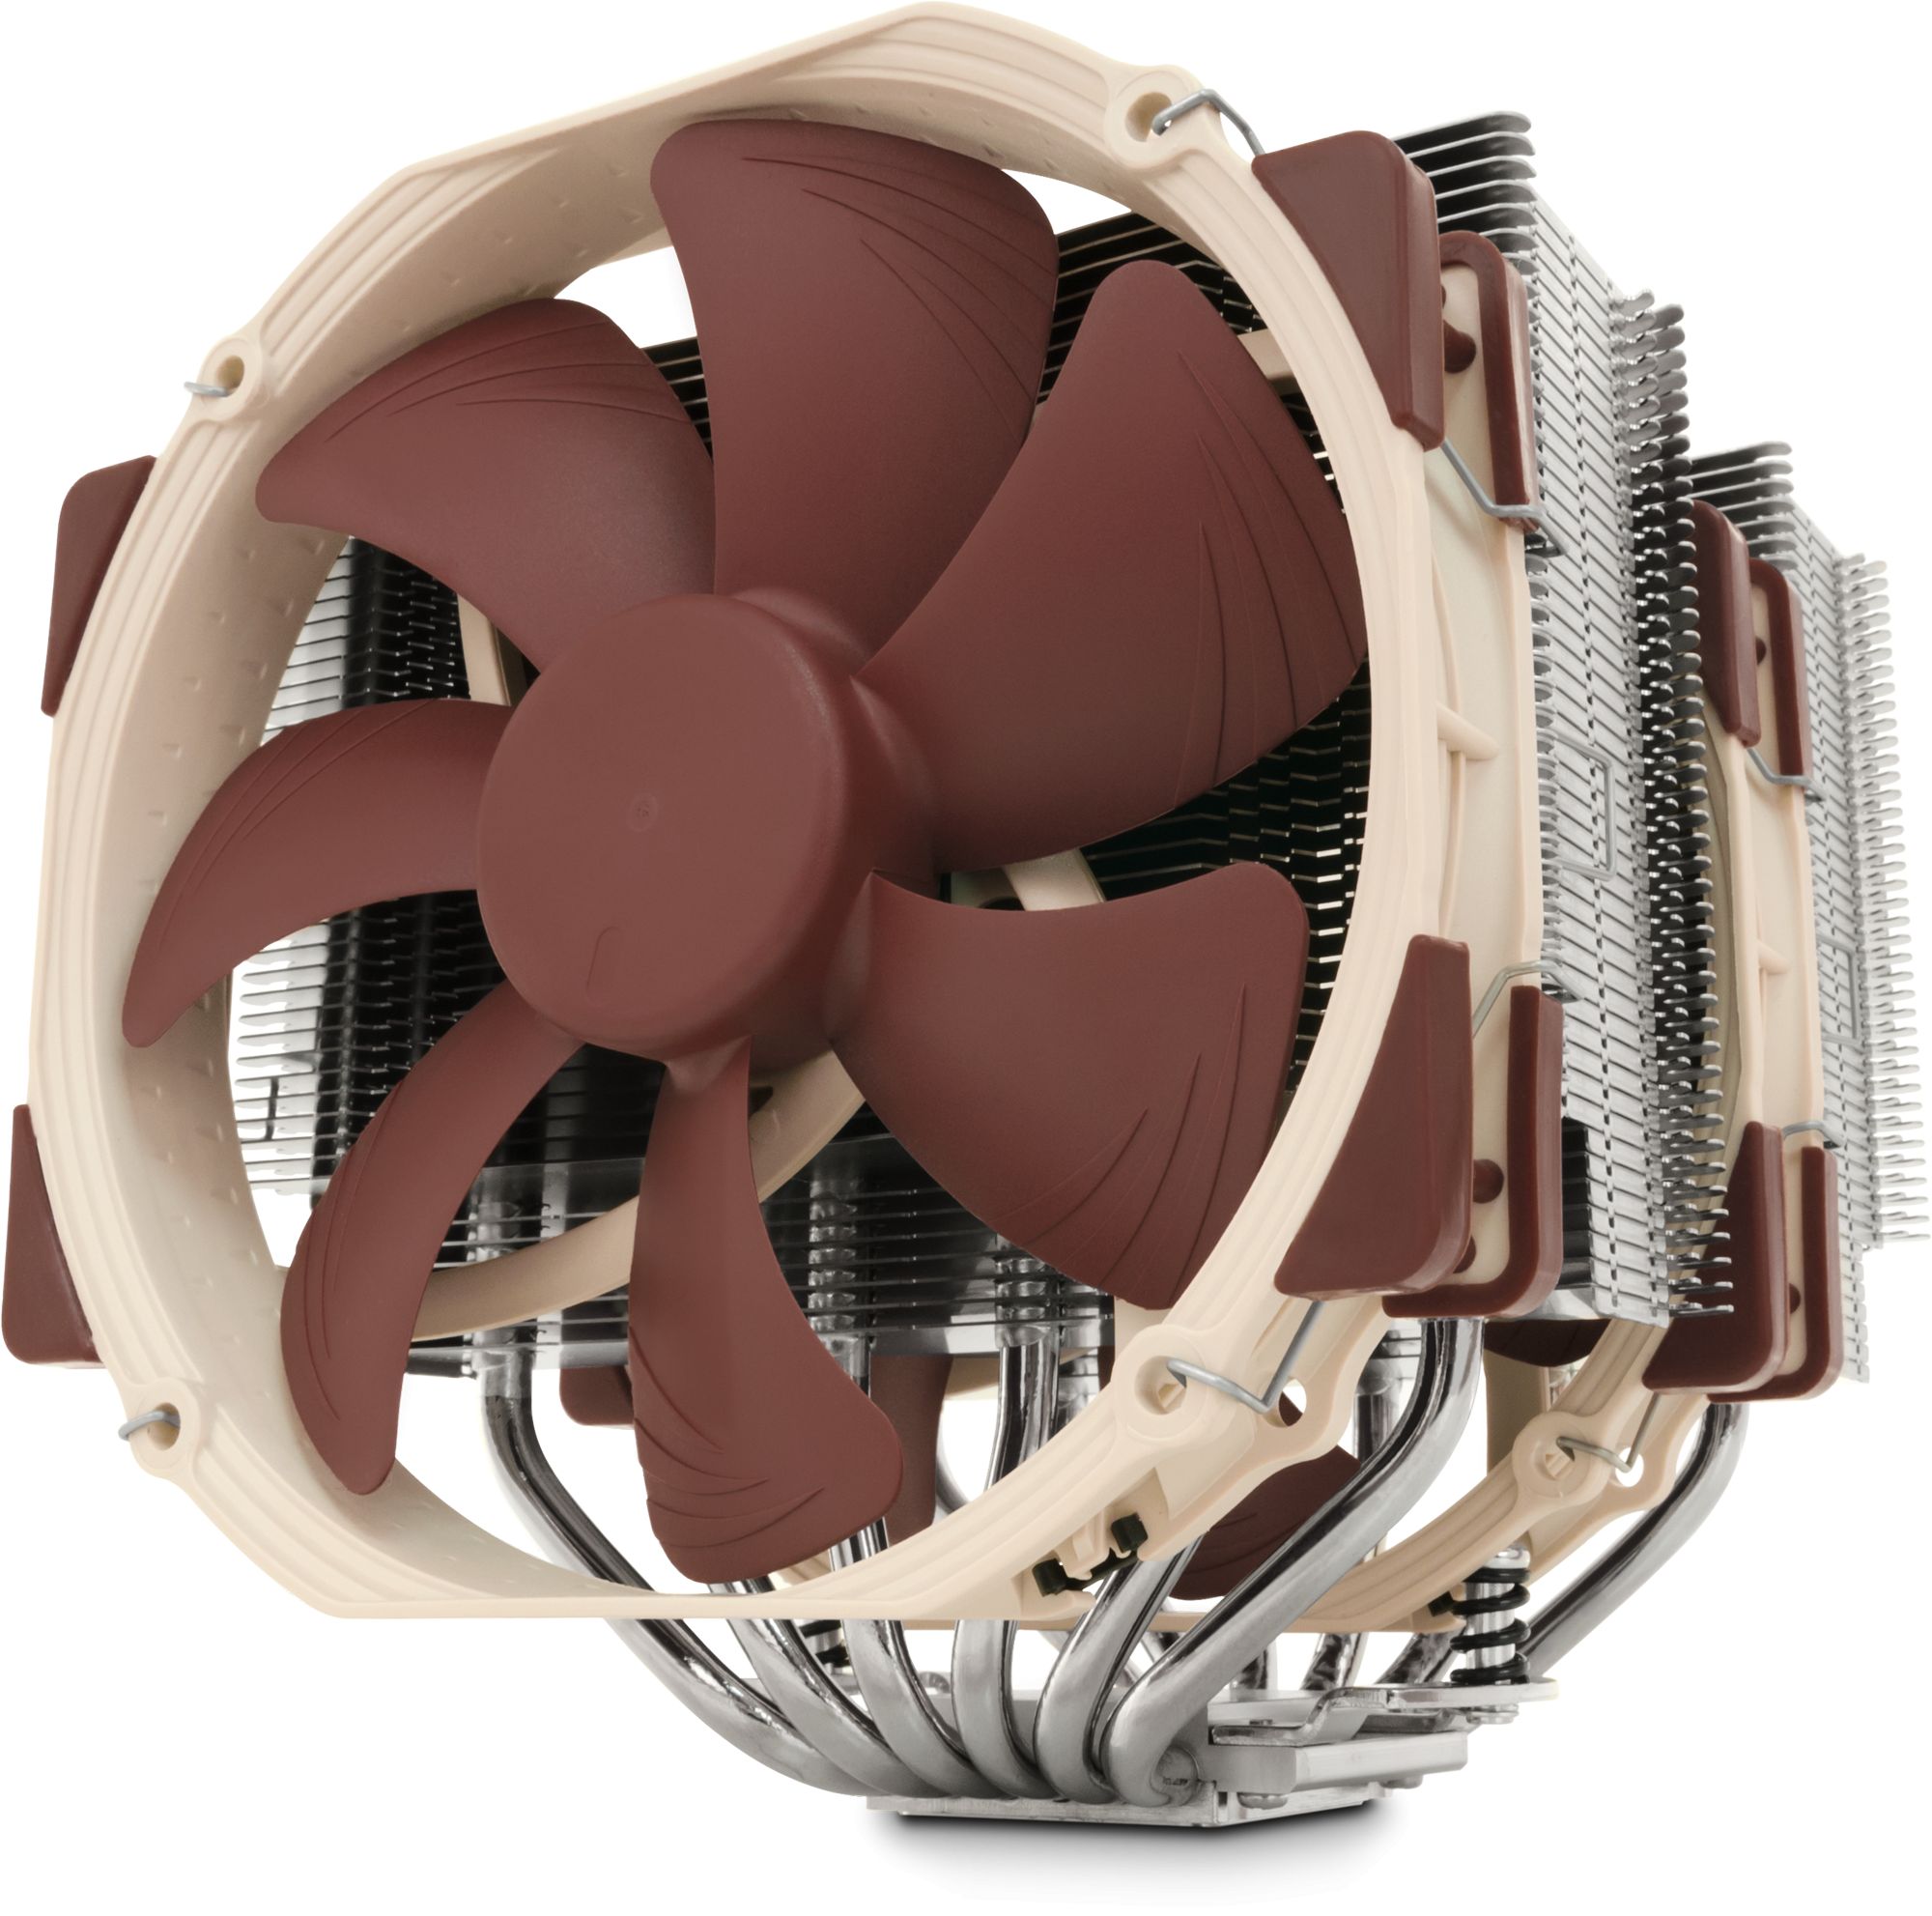 B Grade Noctua NH-D15 Dual Radiator Quiet CPU Cooler with two NH-A15 Fans